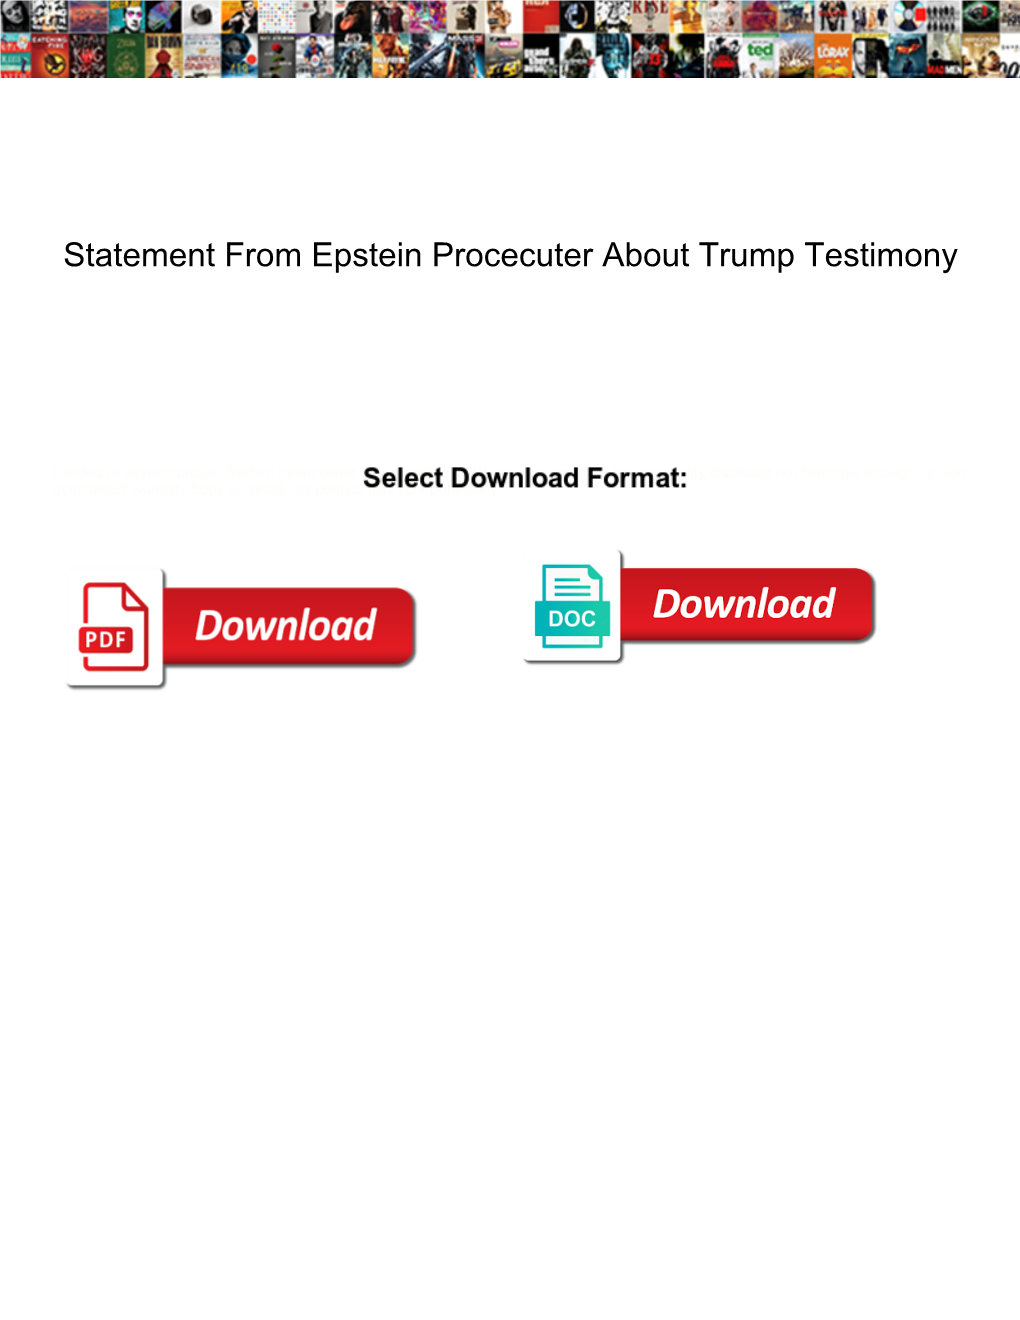 Statement from Epstein Procecuter About Trump Testimony